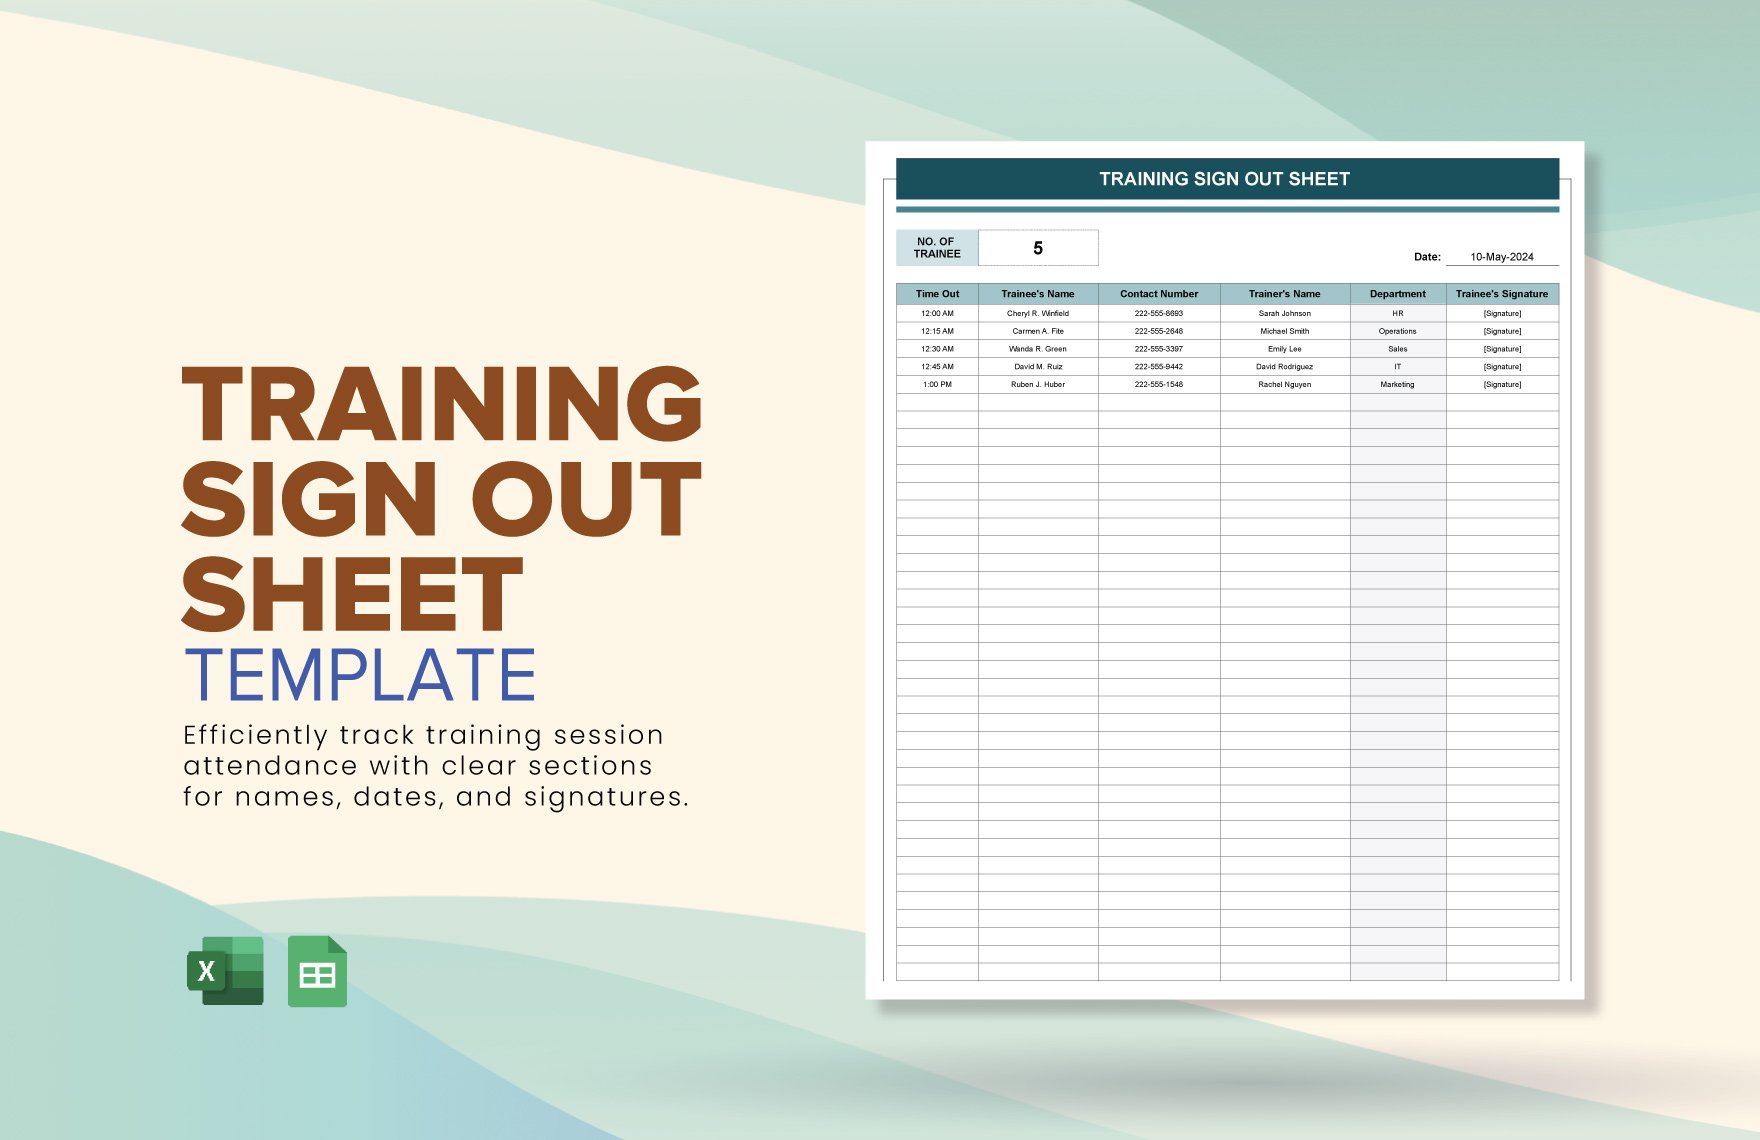 Training Sign Out Sheet Template in Excel, Google Sheets